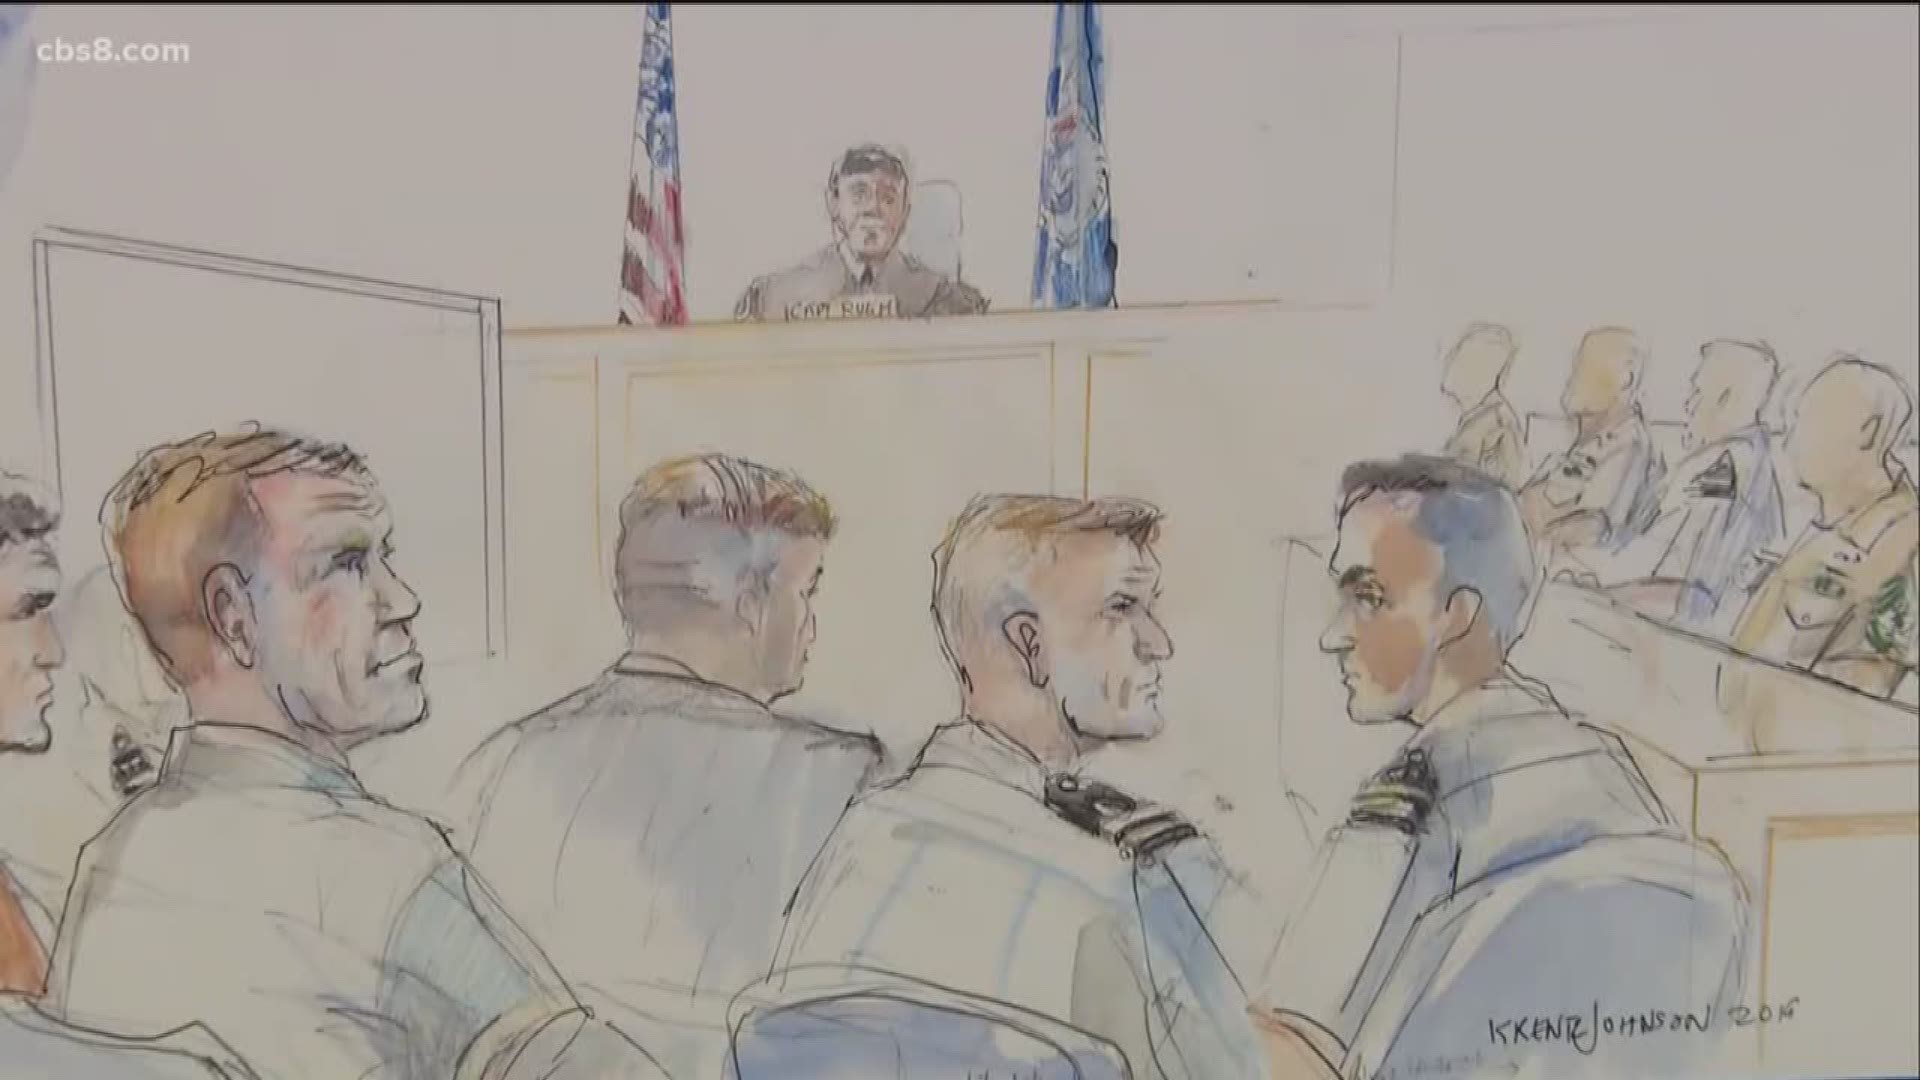 A decorated Navy SEAL stabbed to death a wounded and captive teenage Islamic State fighter in Iraq and then bragged about it, a military prosecutor told jurors Tuesday during opening statements in a politically charged court-martial.